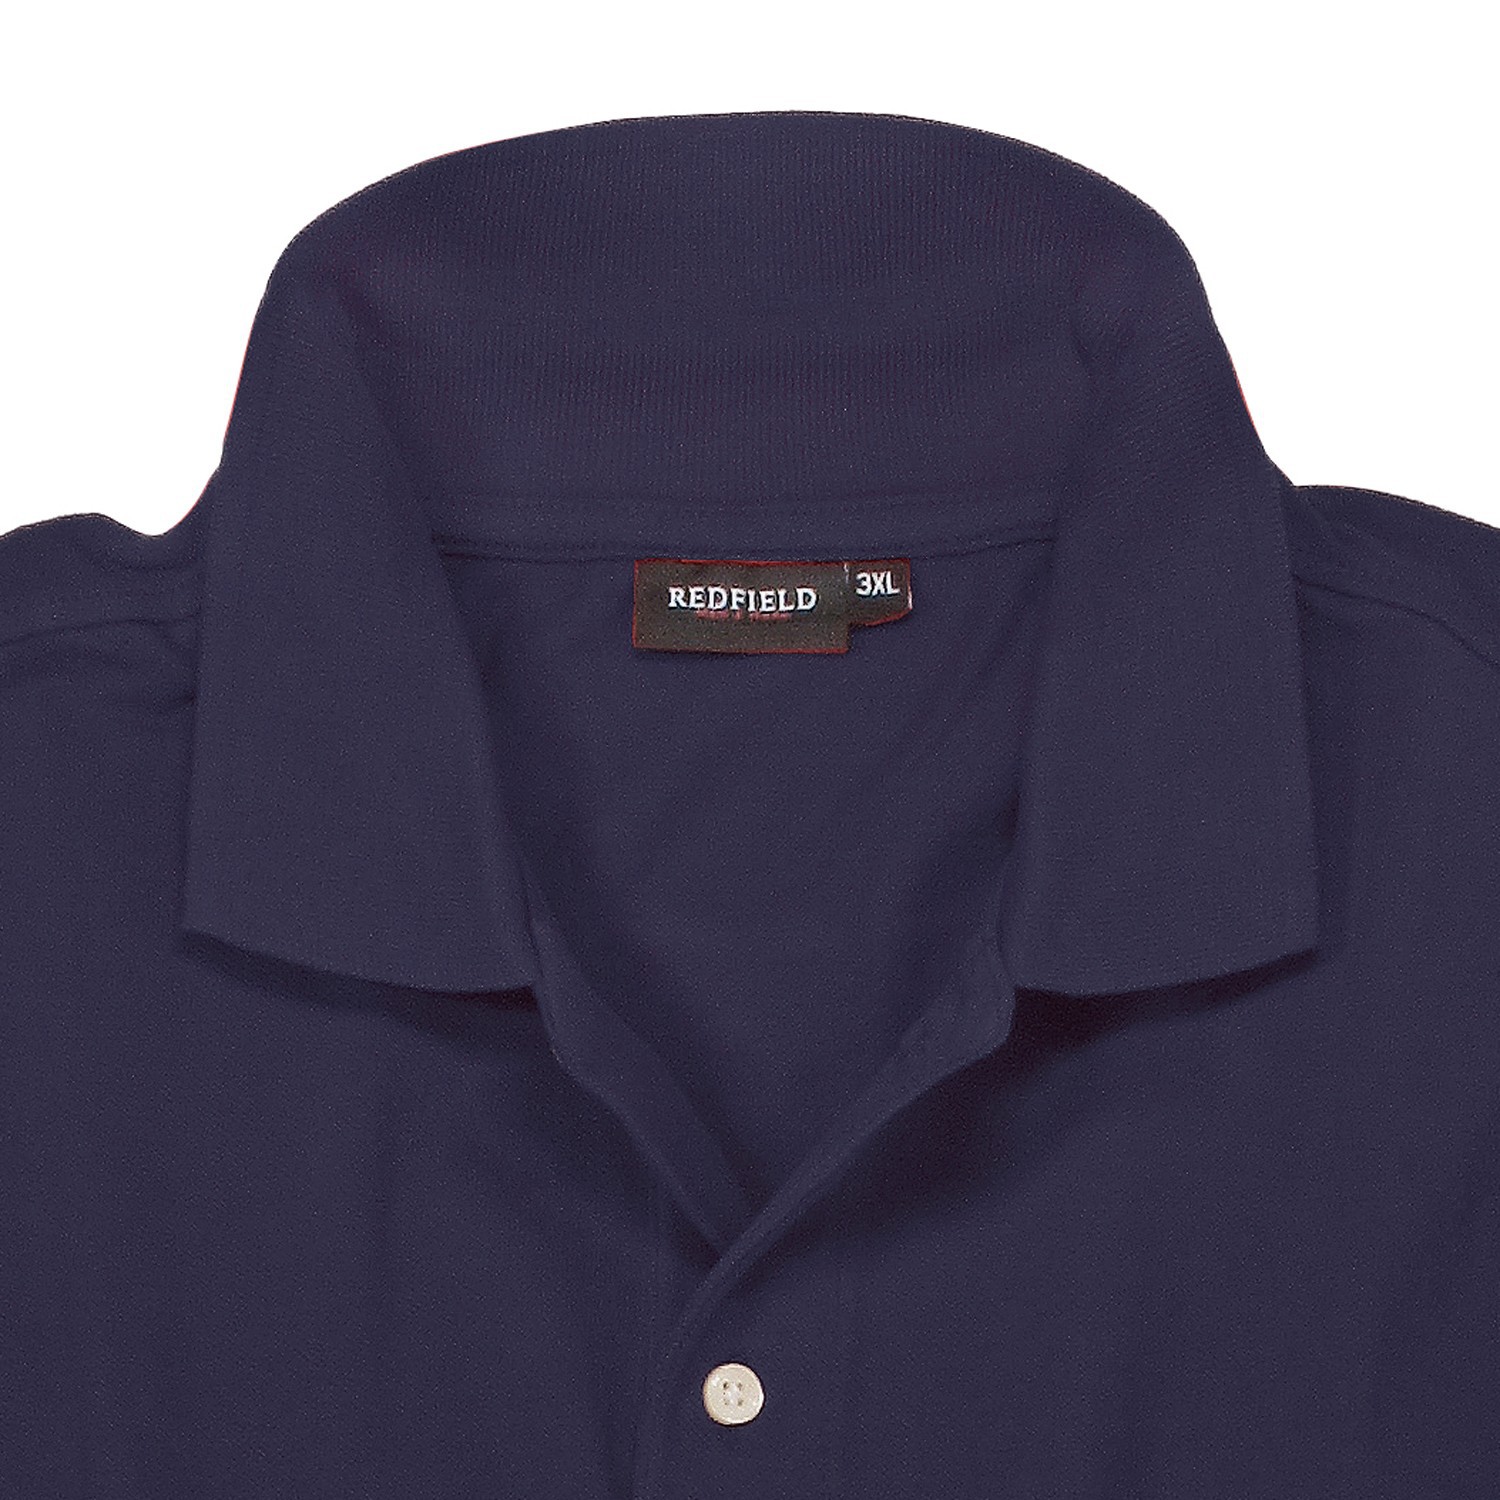 Polo shirt in dark blue by Redfield in extra large sizes until 10XL